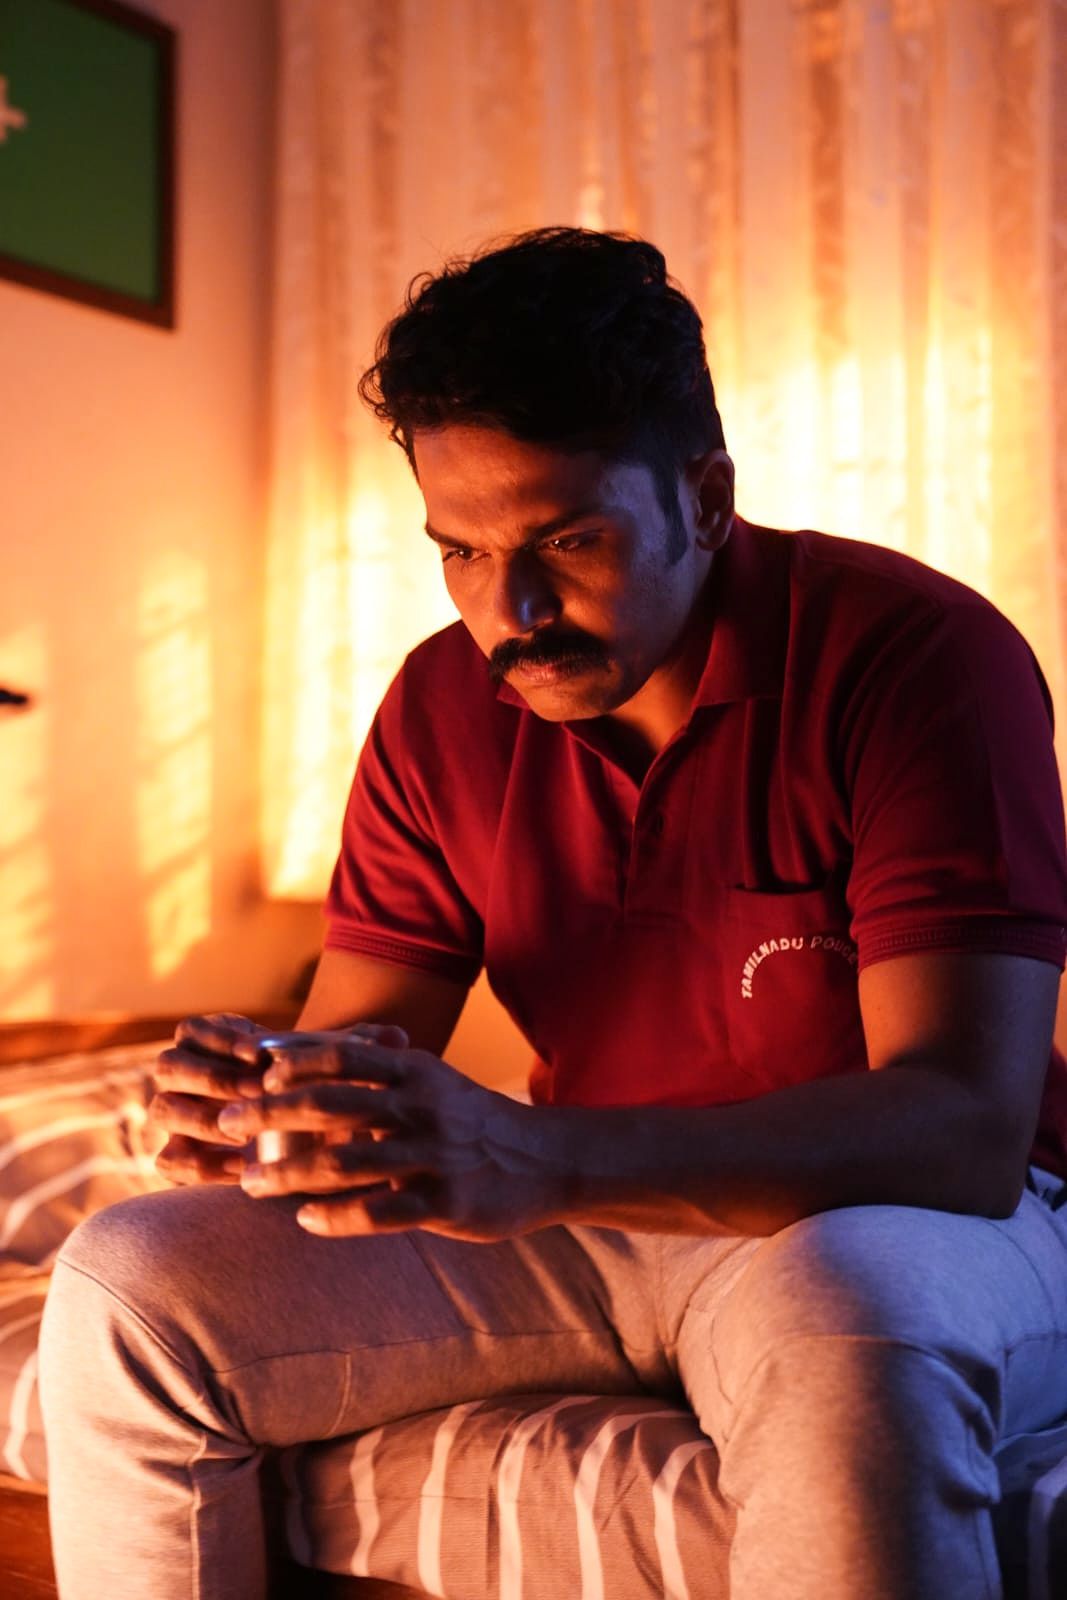 Karthi shared his candid picture clicked by ranjani